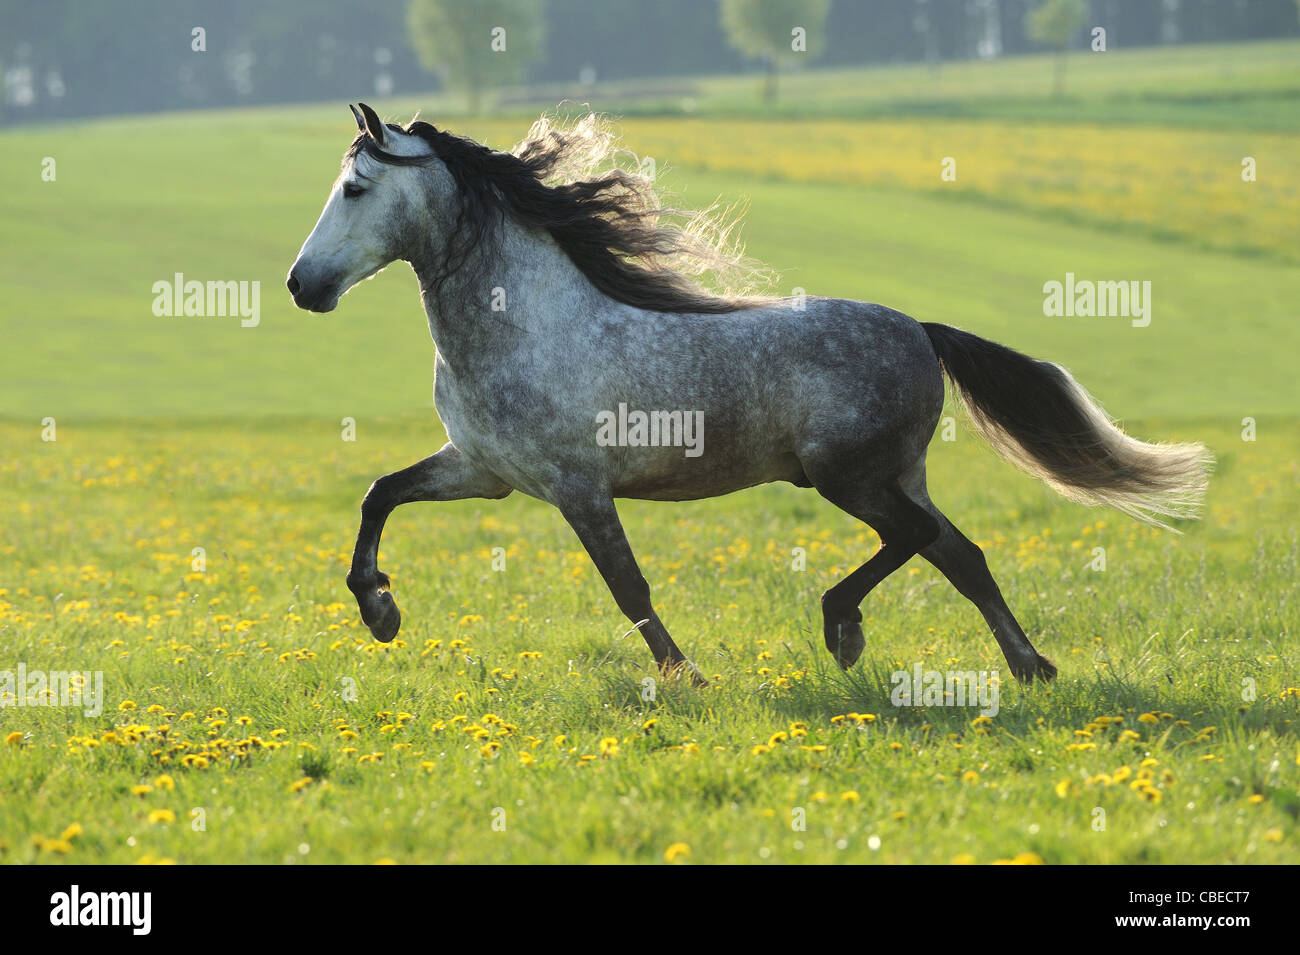 Andalusian Horse (Equus ferus caballus). Dapple gray gelding in a trot on a meadow. Stock Photo